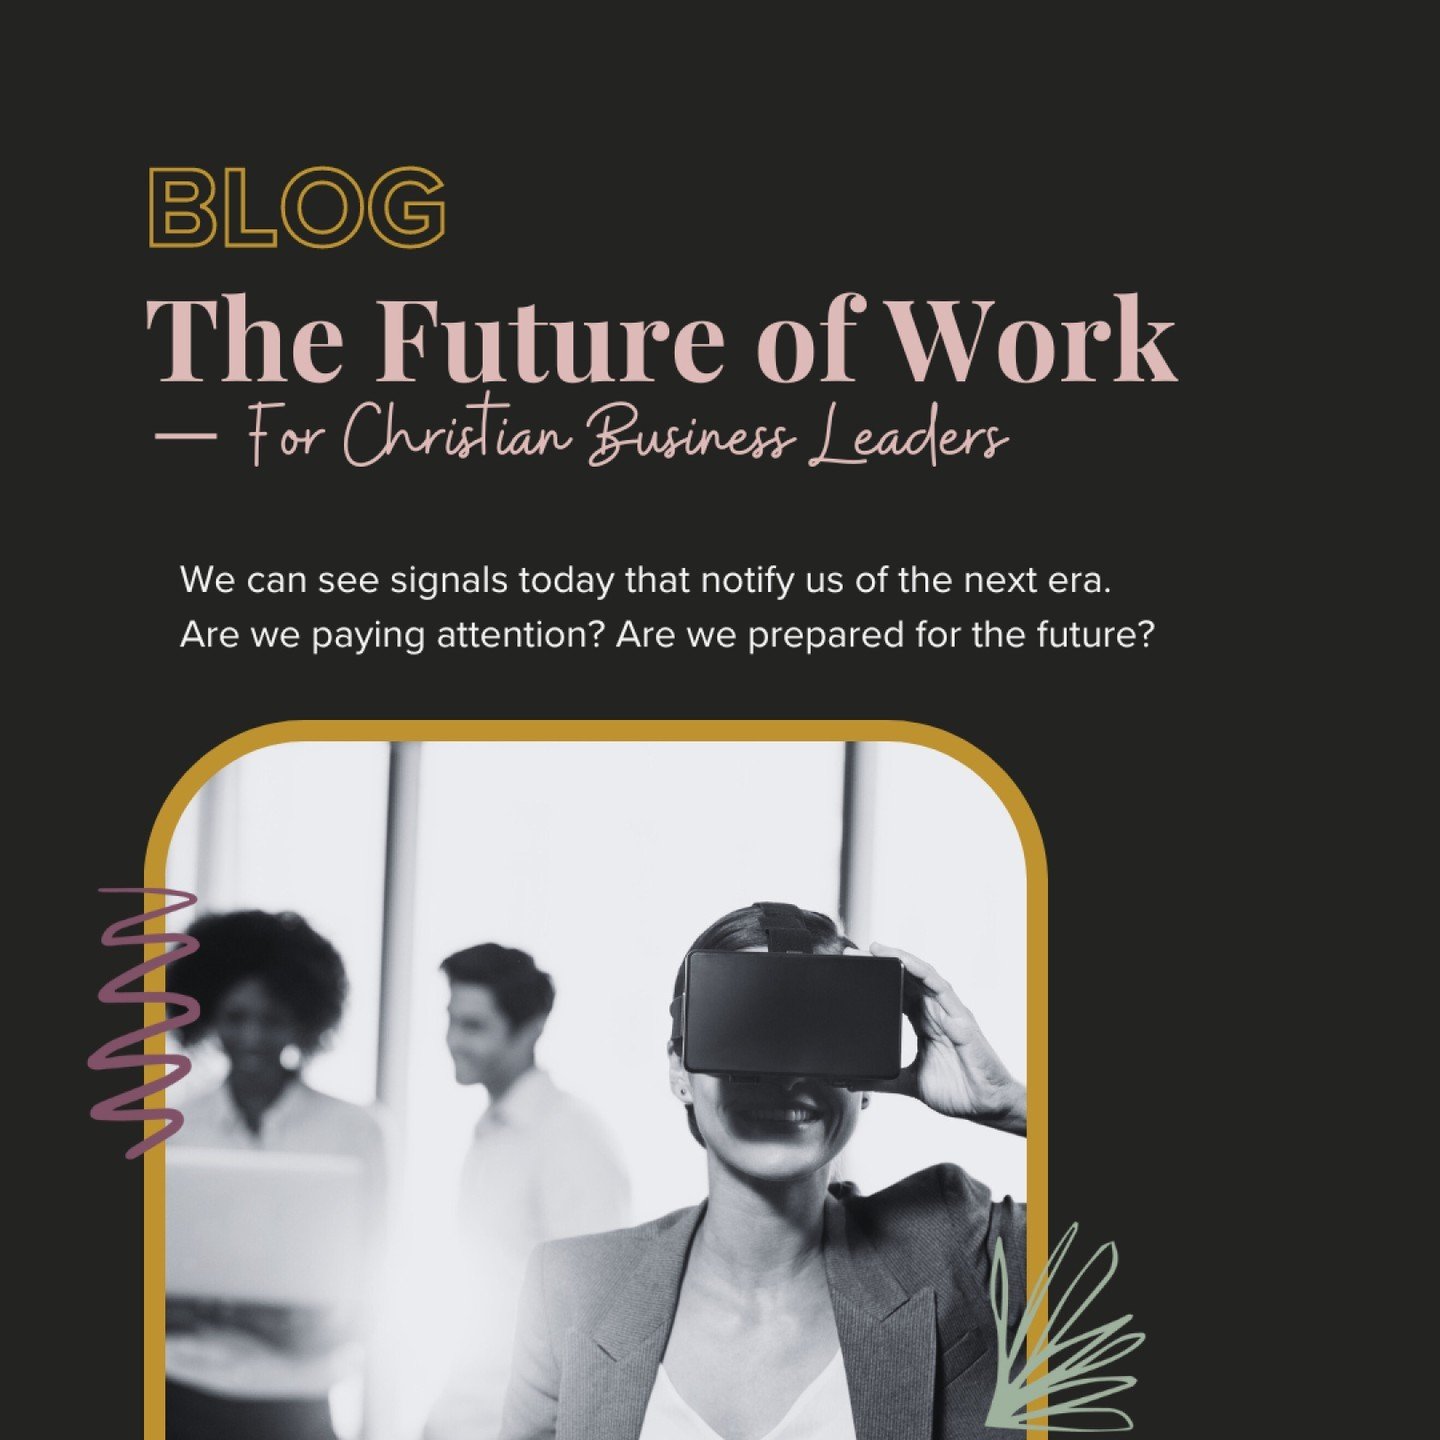 ICYMI: I wrote a blog post for @truthatwork on The Future of Work for Christian Business Leaders 🌿

This is important stuff. If you aren't participating in the advancements of today, how do you think that will affect our culture and communities for 